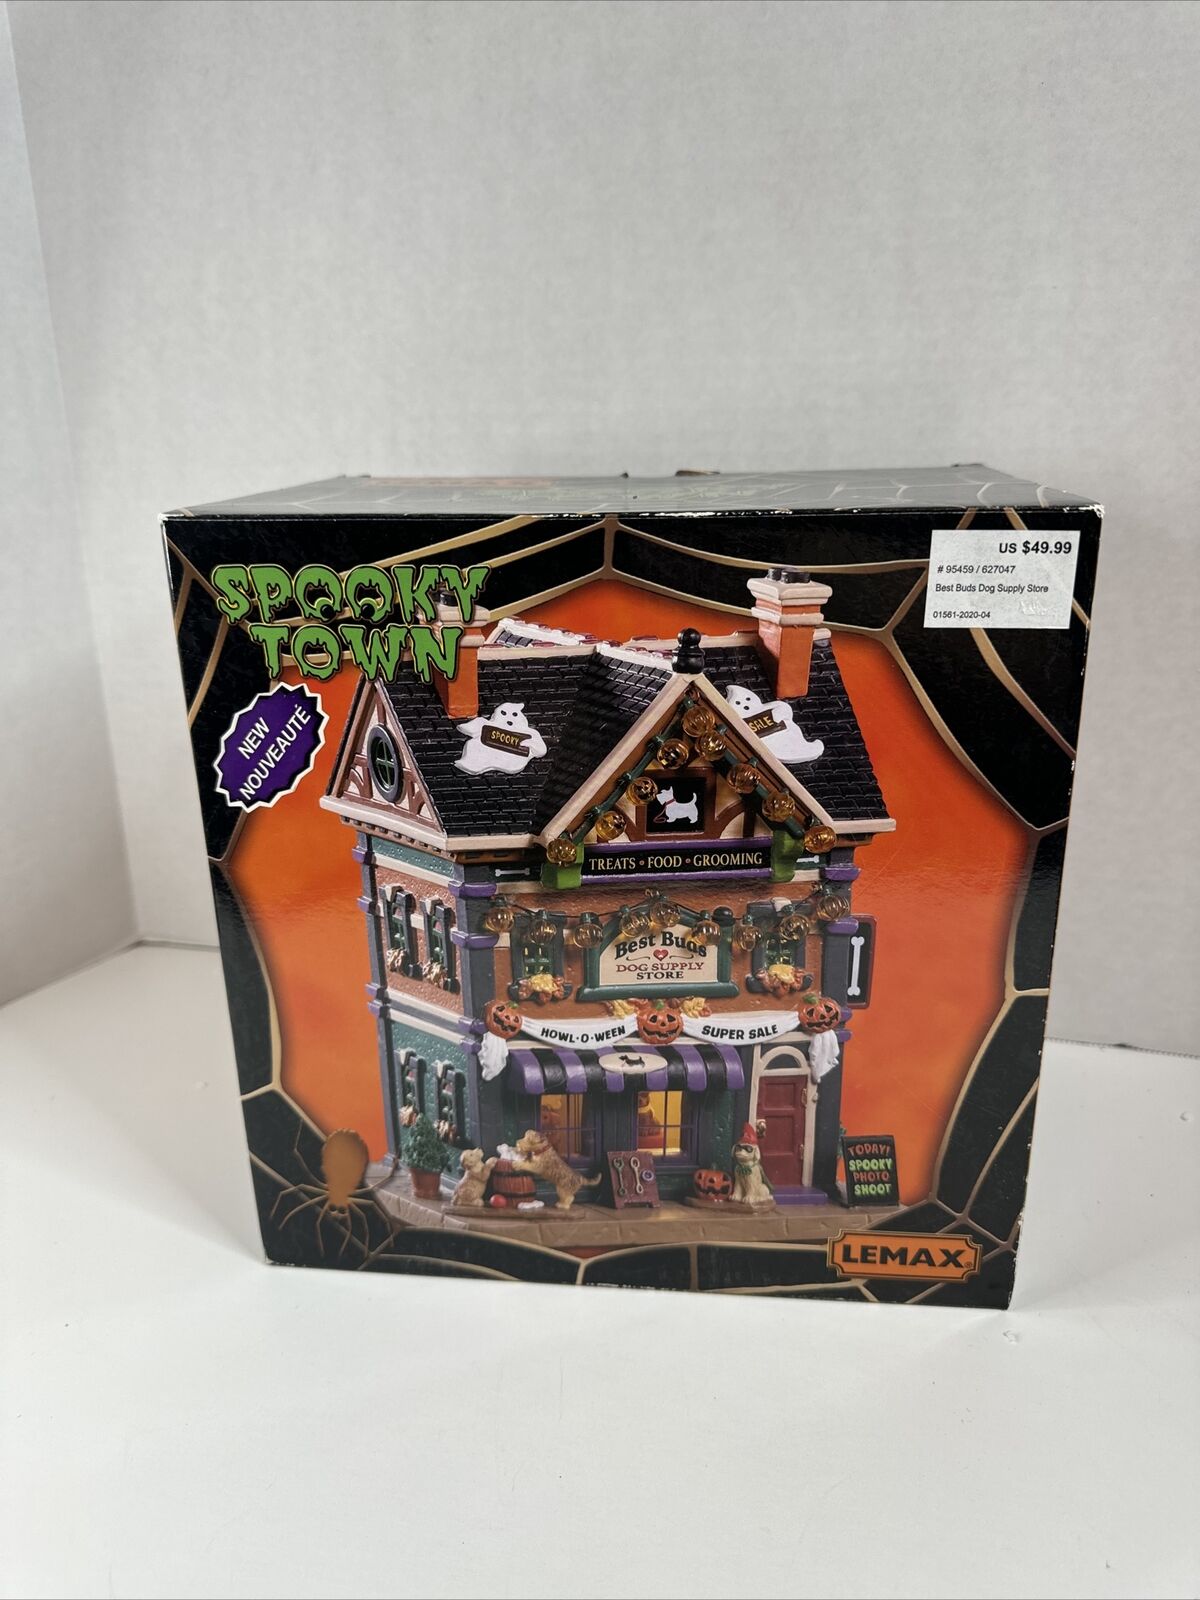 Lemax Spooky Town Best Buds Dog Supply Store #95459 Lighted Building Read